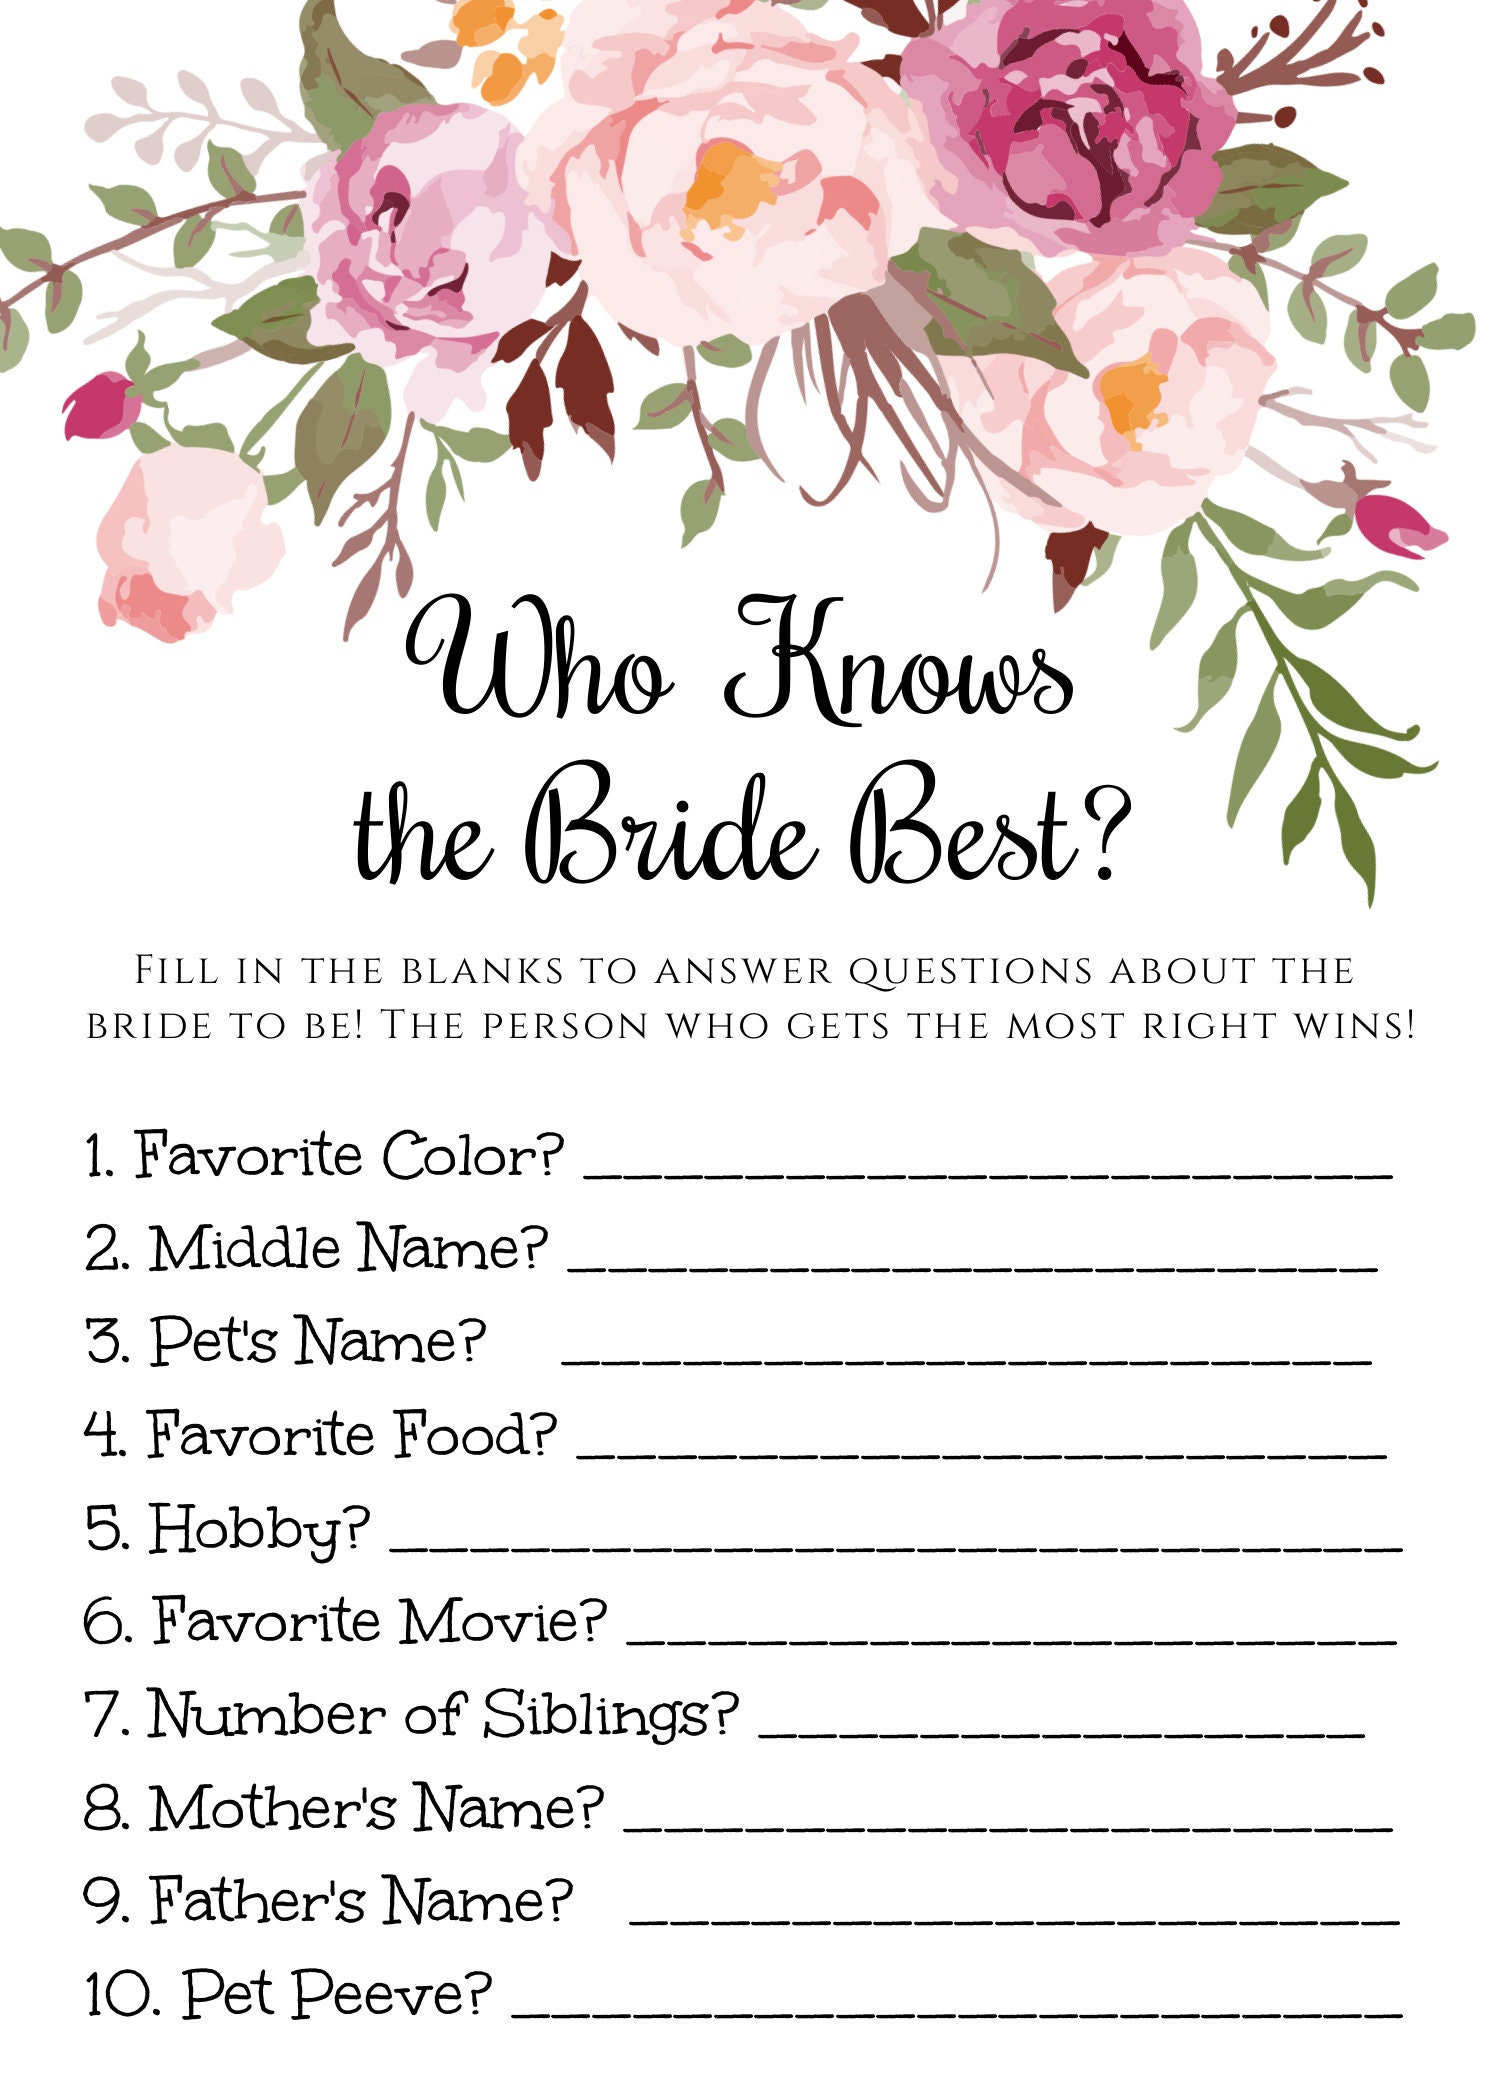 Pink Floral Who Knows the Bride Best Game Template for Bridal | Etsy